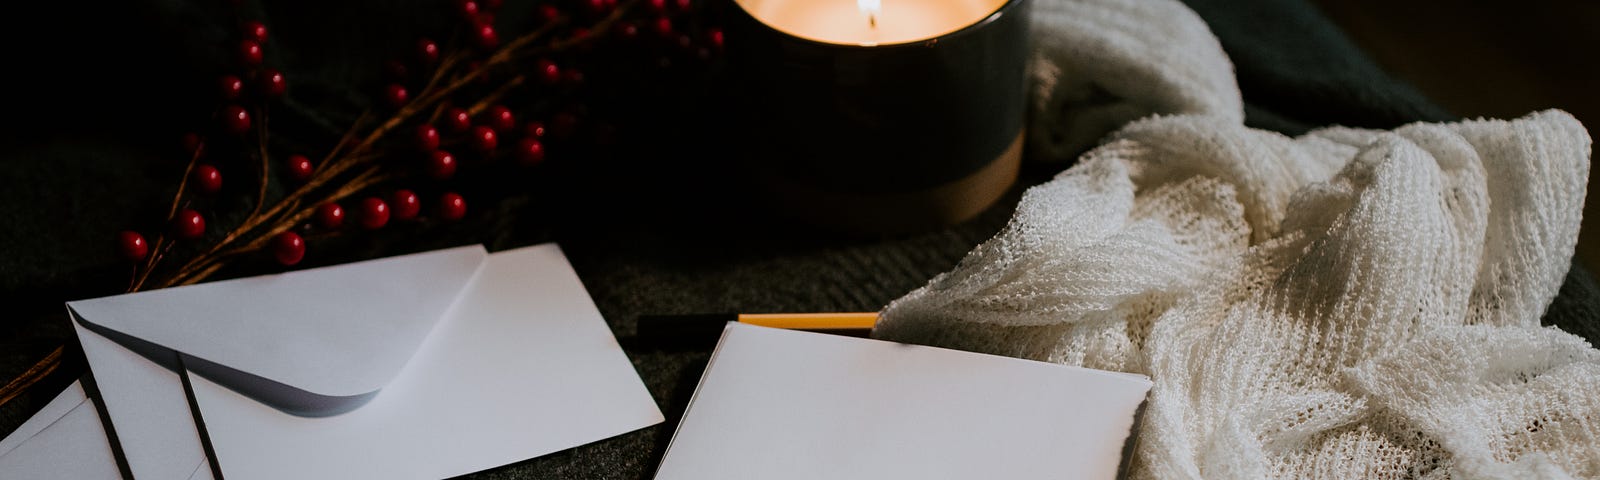 A candle surrounded by some stationary, a cloth, pen, and a branch with red berries